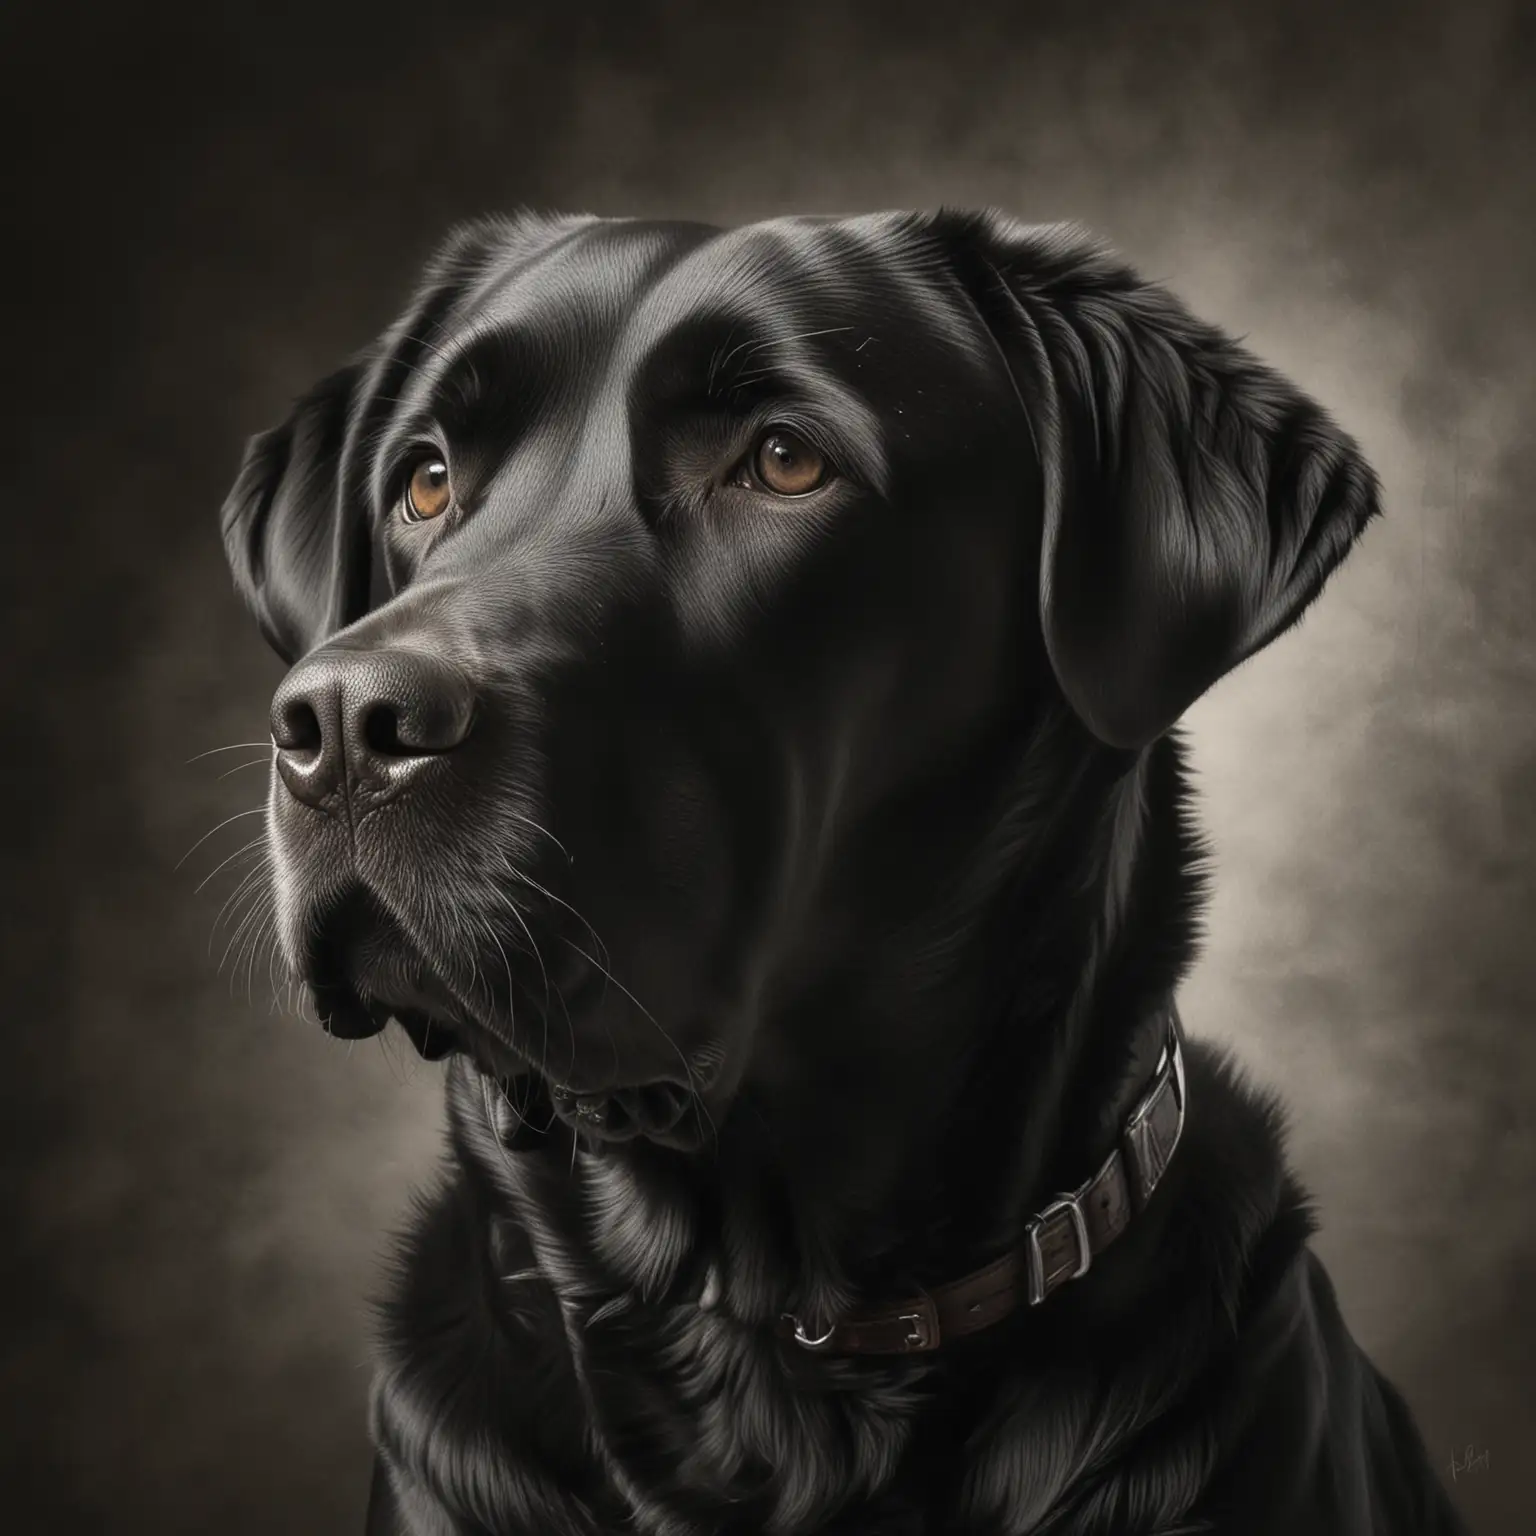 Realistic Charcoal Drawing (((black Labrador retriever))), captured in the style of Bulgarian Expressionism, with emphasis on expressive (((portraits))), bathed in a (HDRI light) that mimics Rembrandt's classic ('Rembrandt Lighting') with aperture value of f/8.5 and focal length of 10mm lens